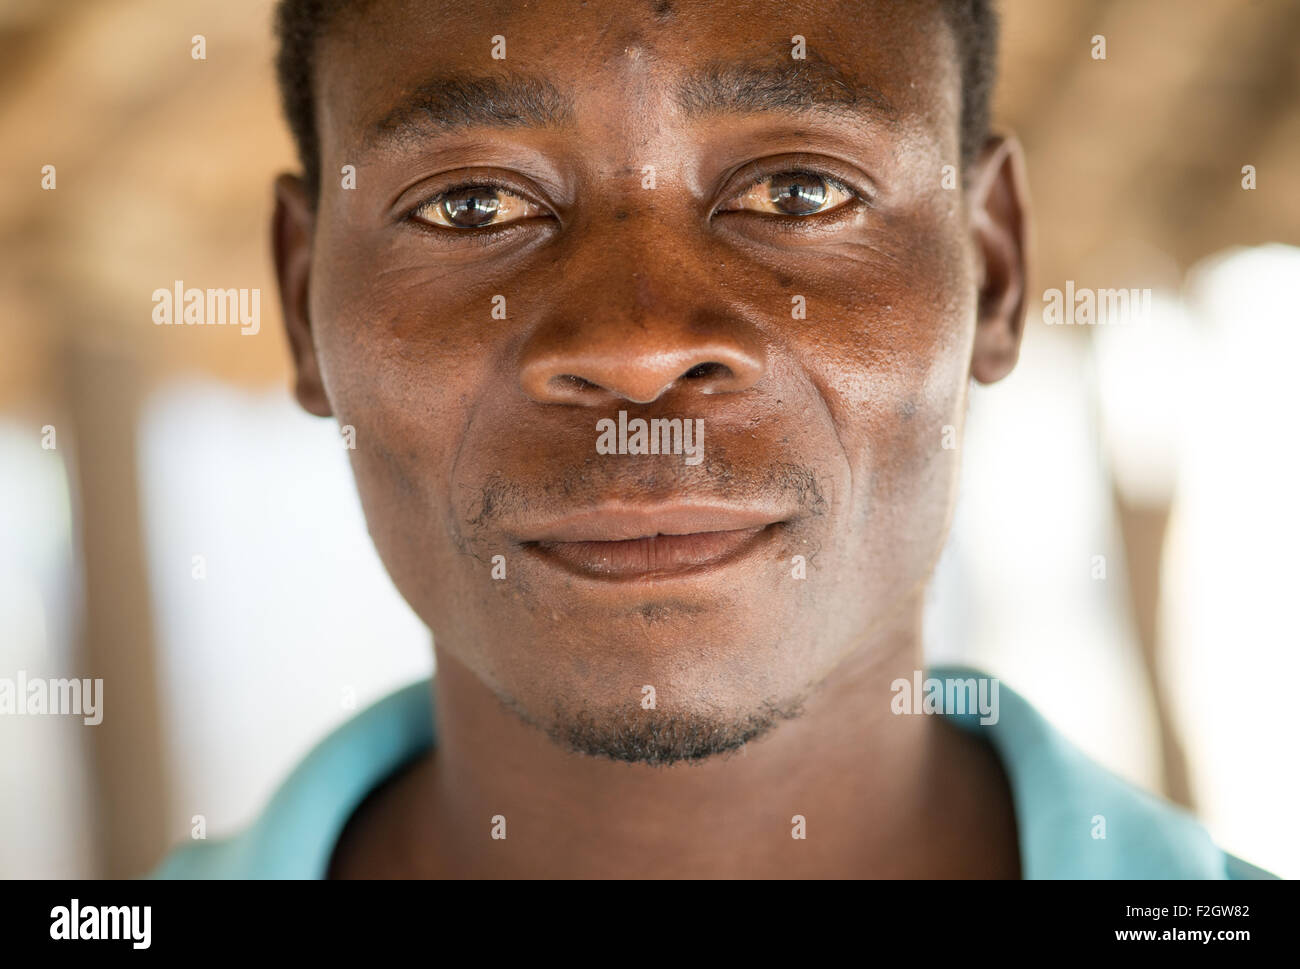 Close-up of African man in Sexaxa Village in Botswana, Africa Stock Photo